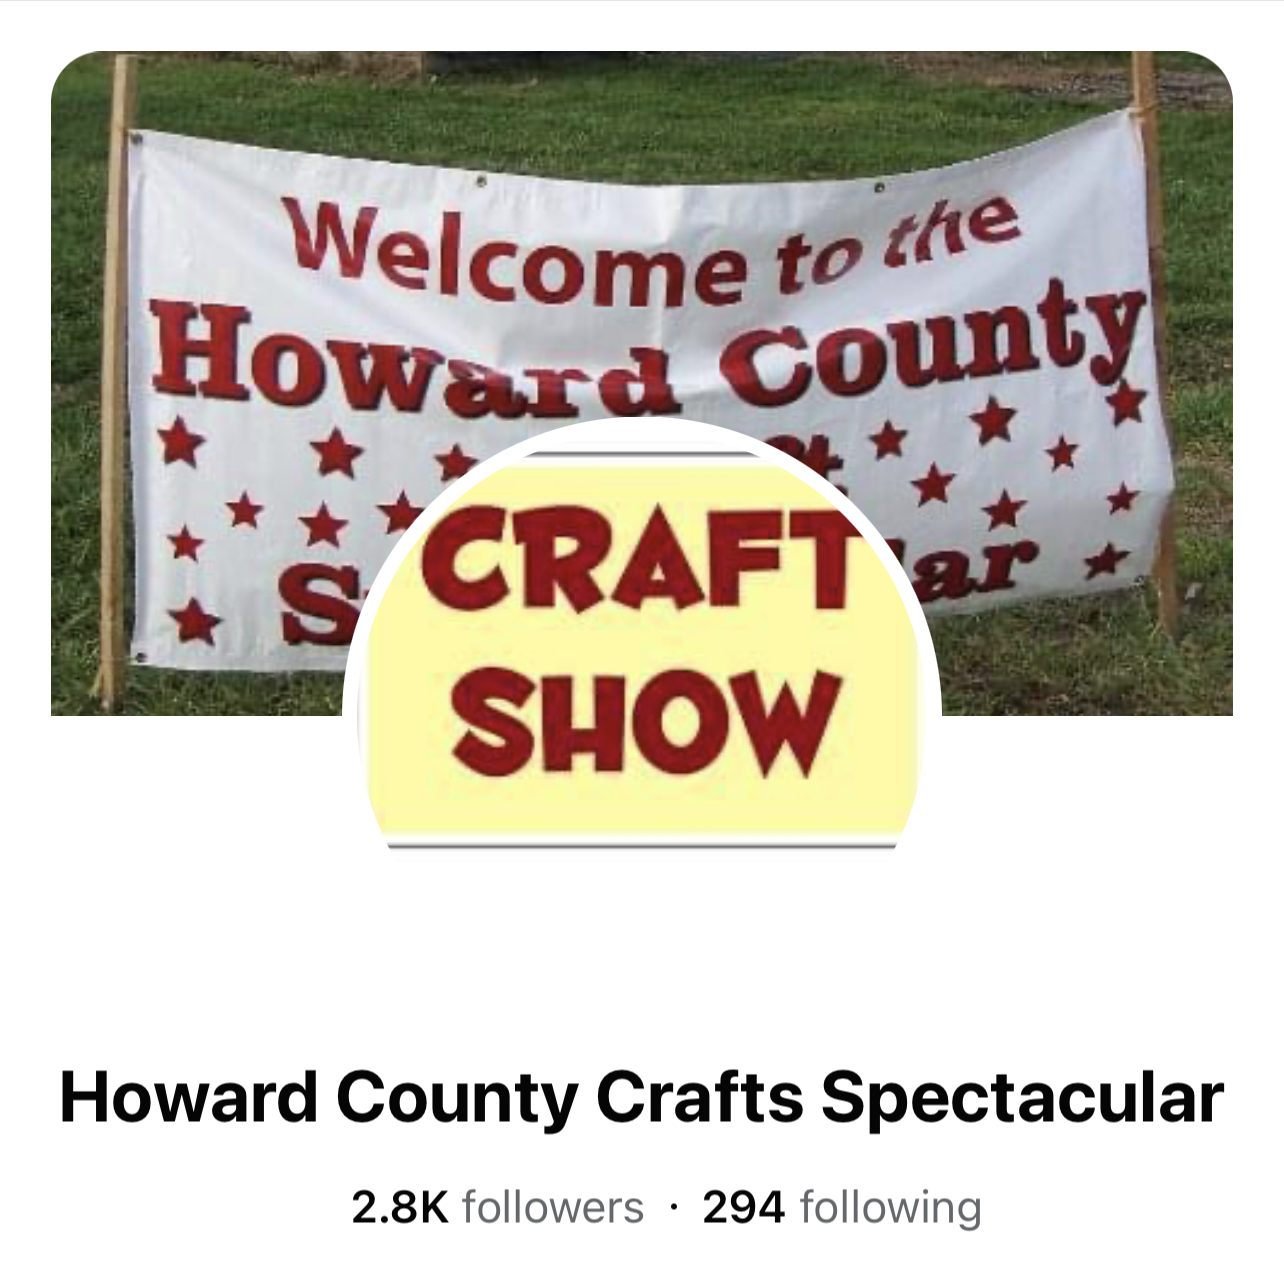 November 4th-6th Howard County Crafts Spectacular